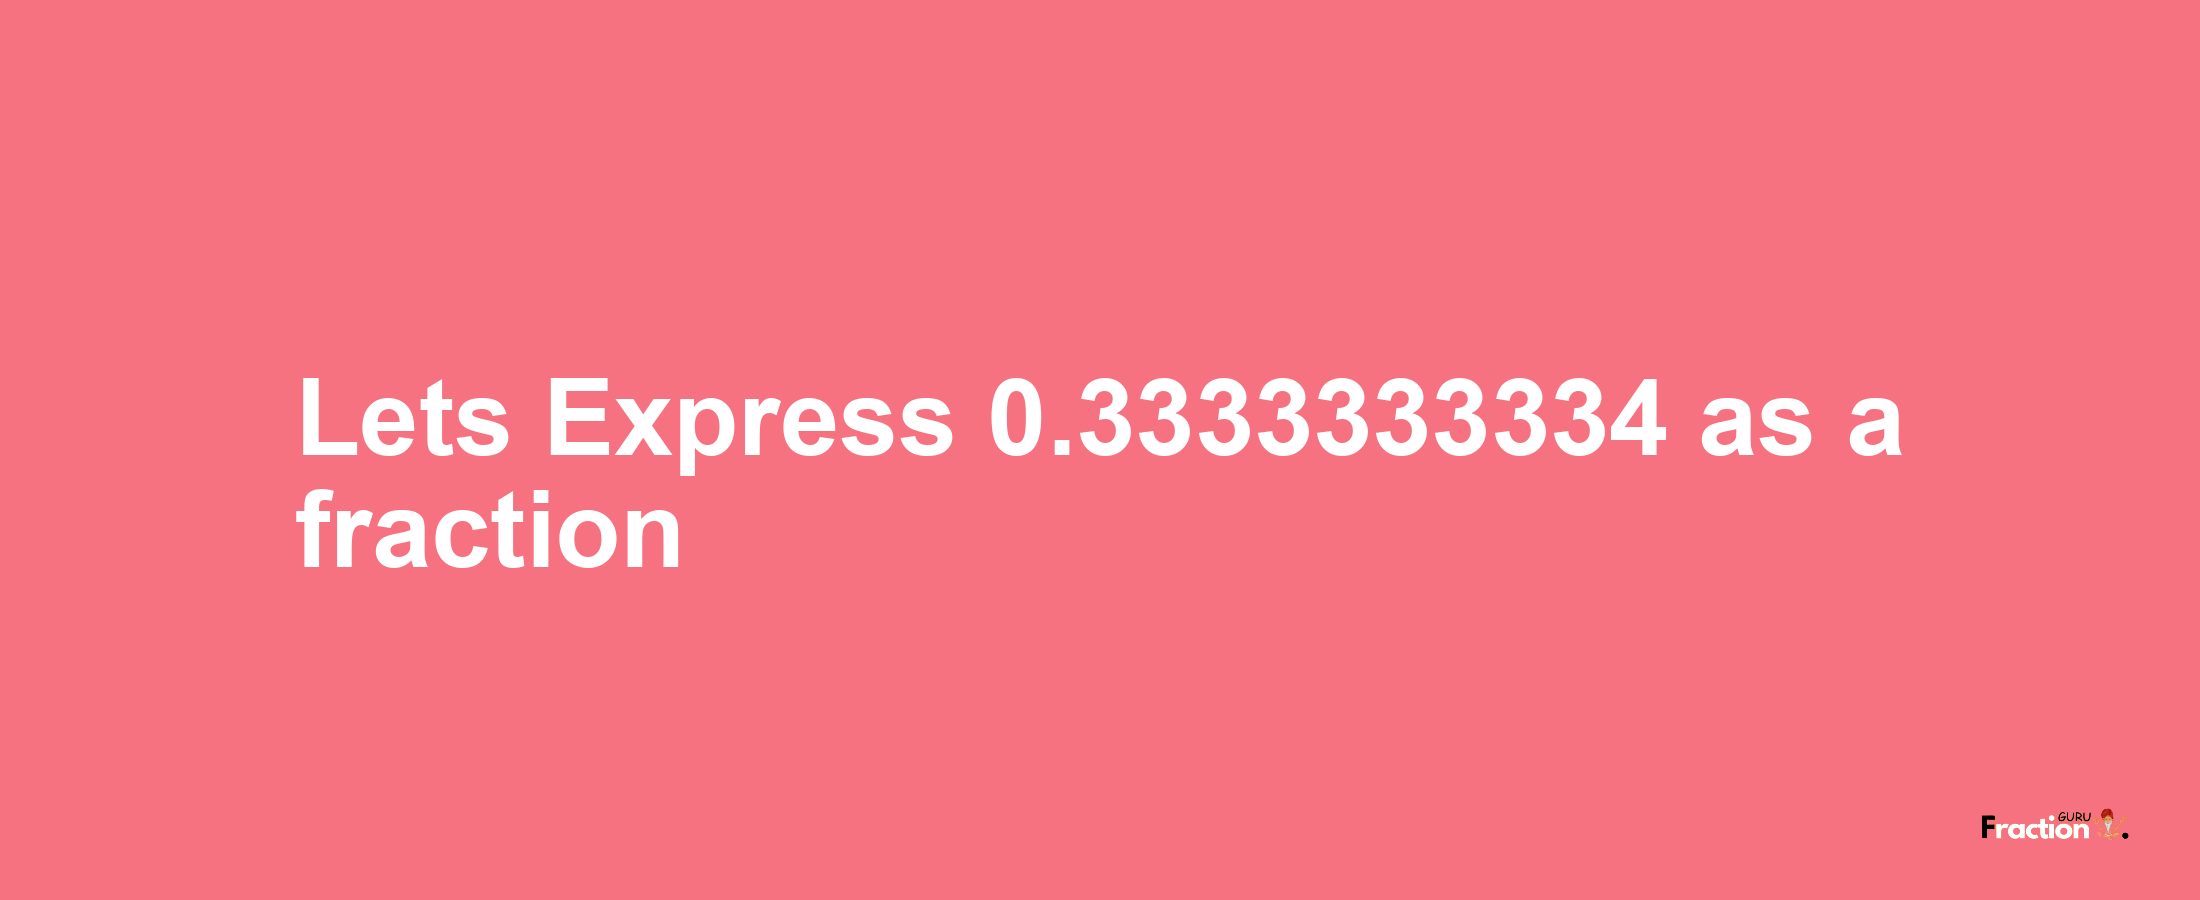 Lets Express 0.3333333334 as afraction